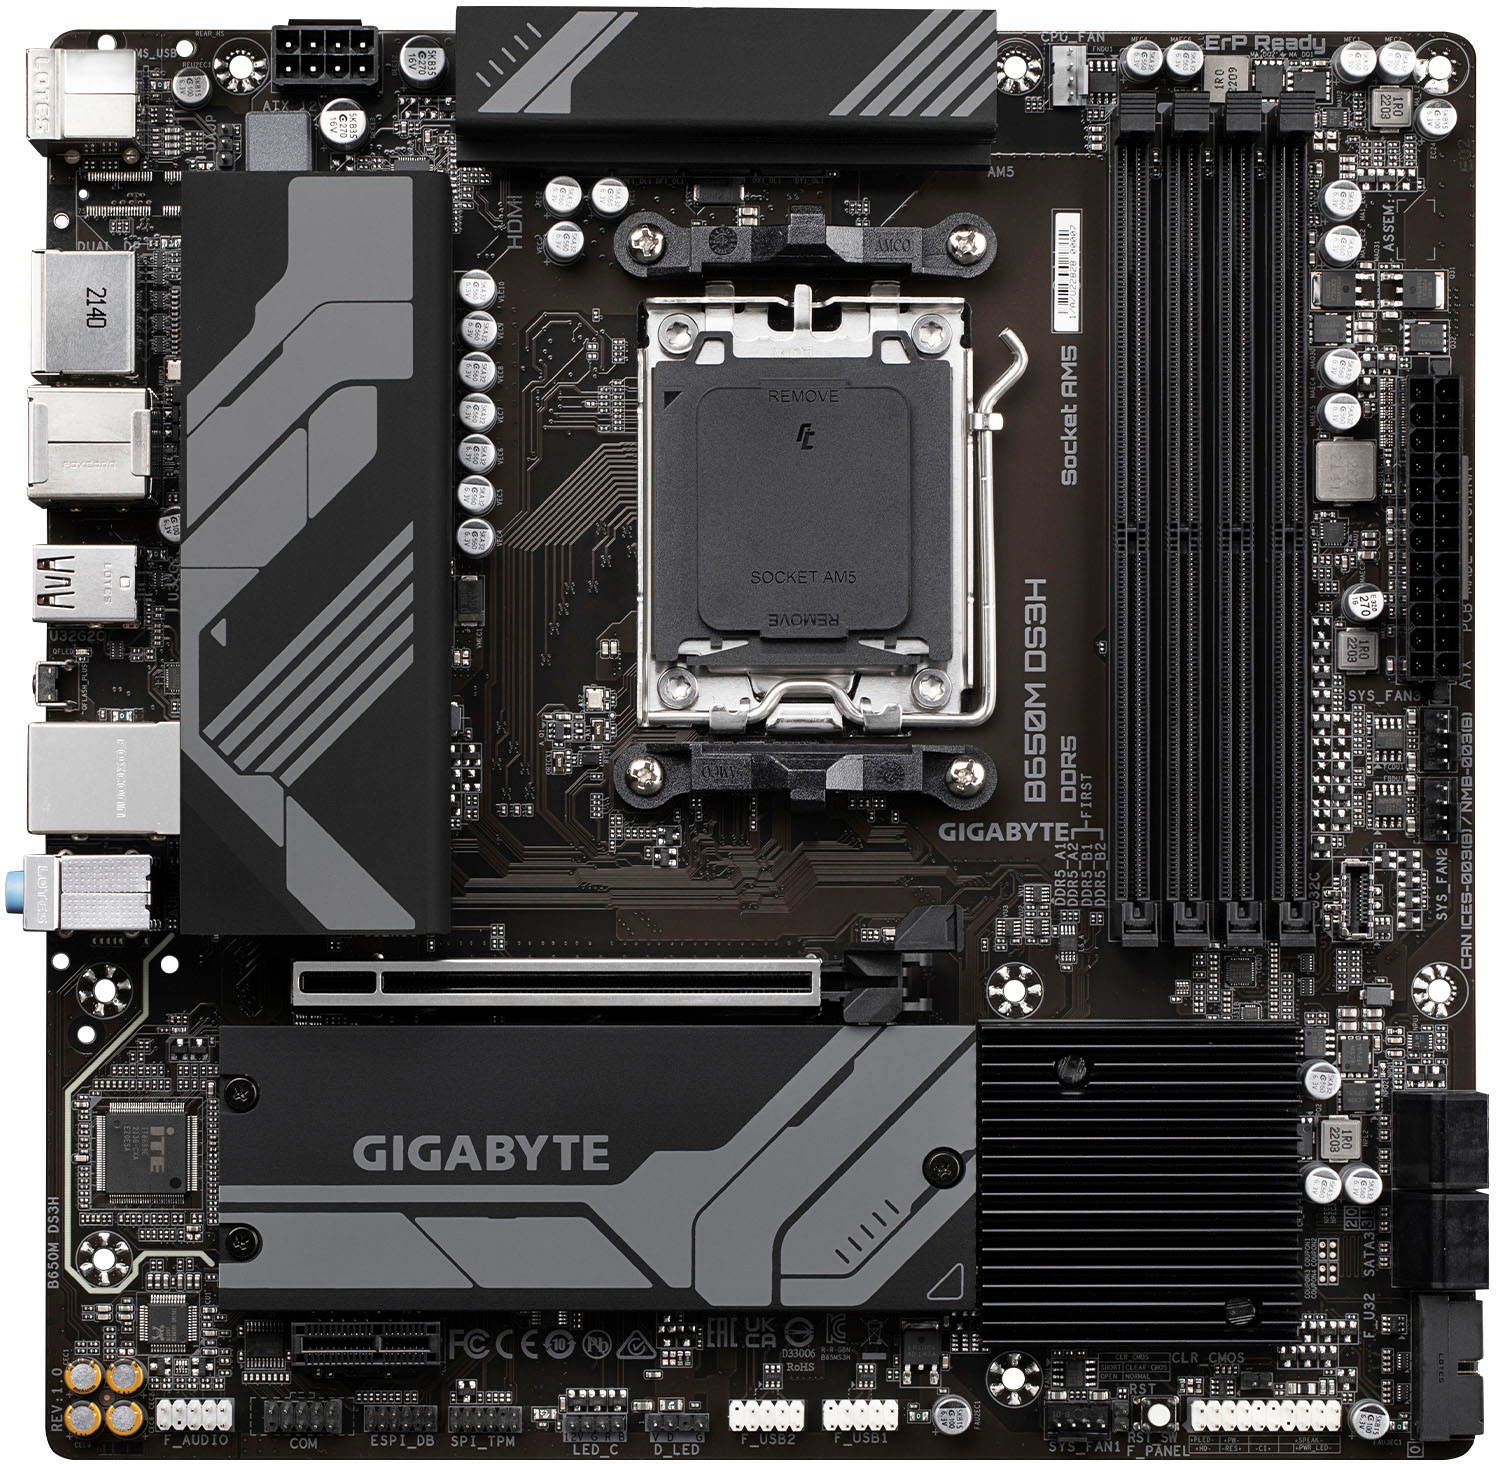 Gigabyte B650 Gaming X vs MSI B650 Gaming Plus WiFi: What is the difference?